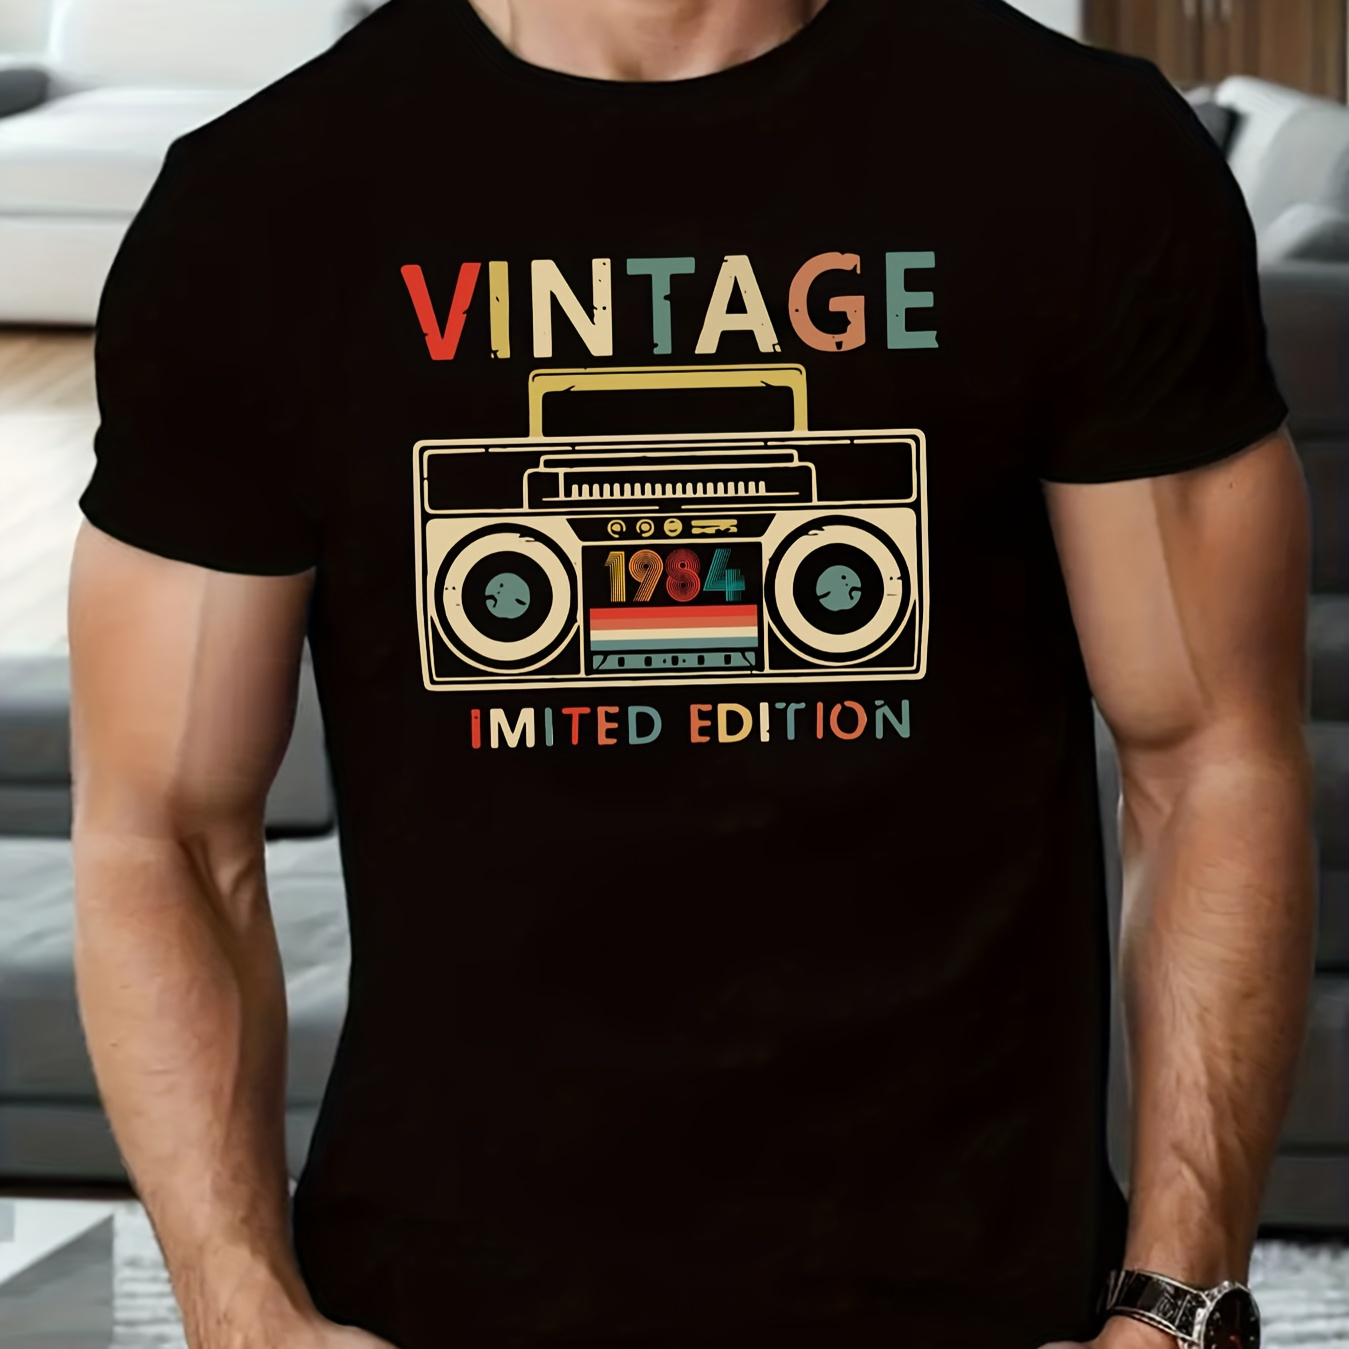 

Vintage 1984 Print Tee Shirt, Tees For Men, Casual Short Sleeve T-shirt For Summer